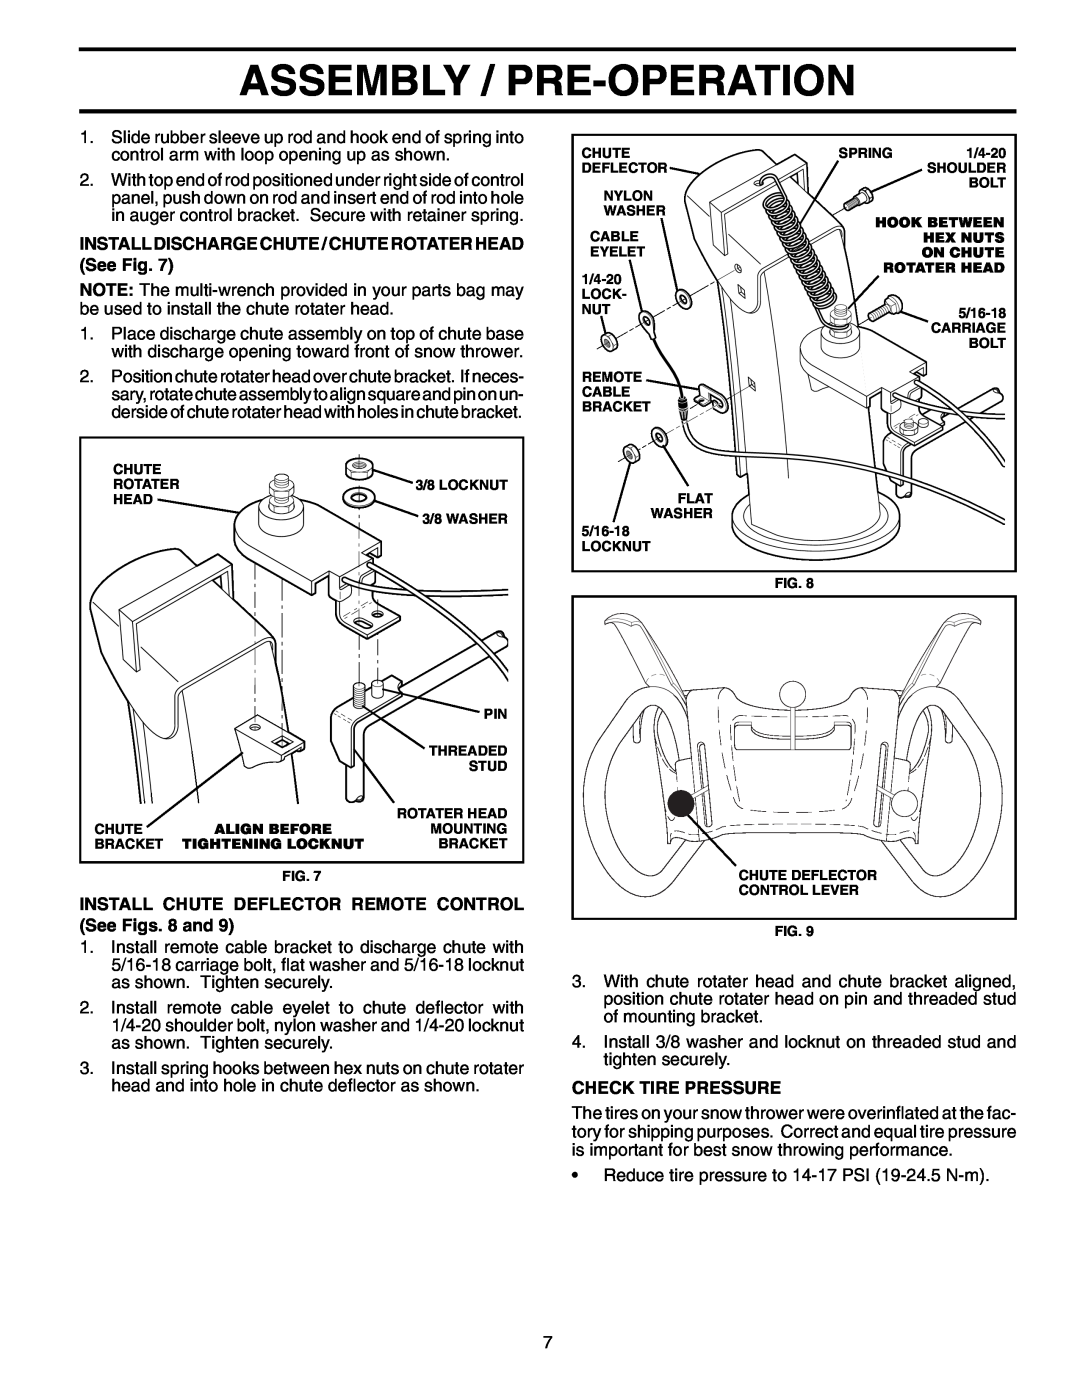 Poulan 199329 Assembly / Pre-Operation, INSTALL DISCHARGE CHUTE / CHUTE ROTATER HEAD See Fig, Check Tire Pressure 